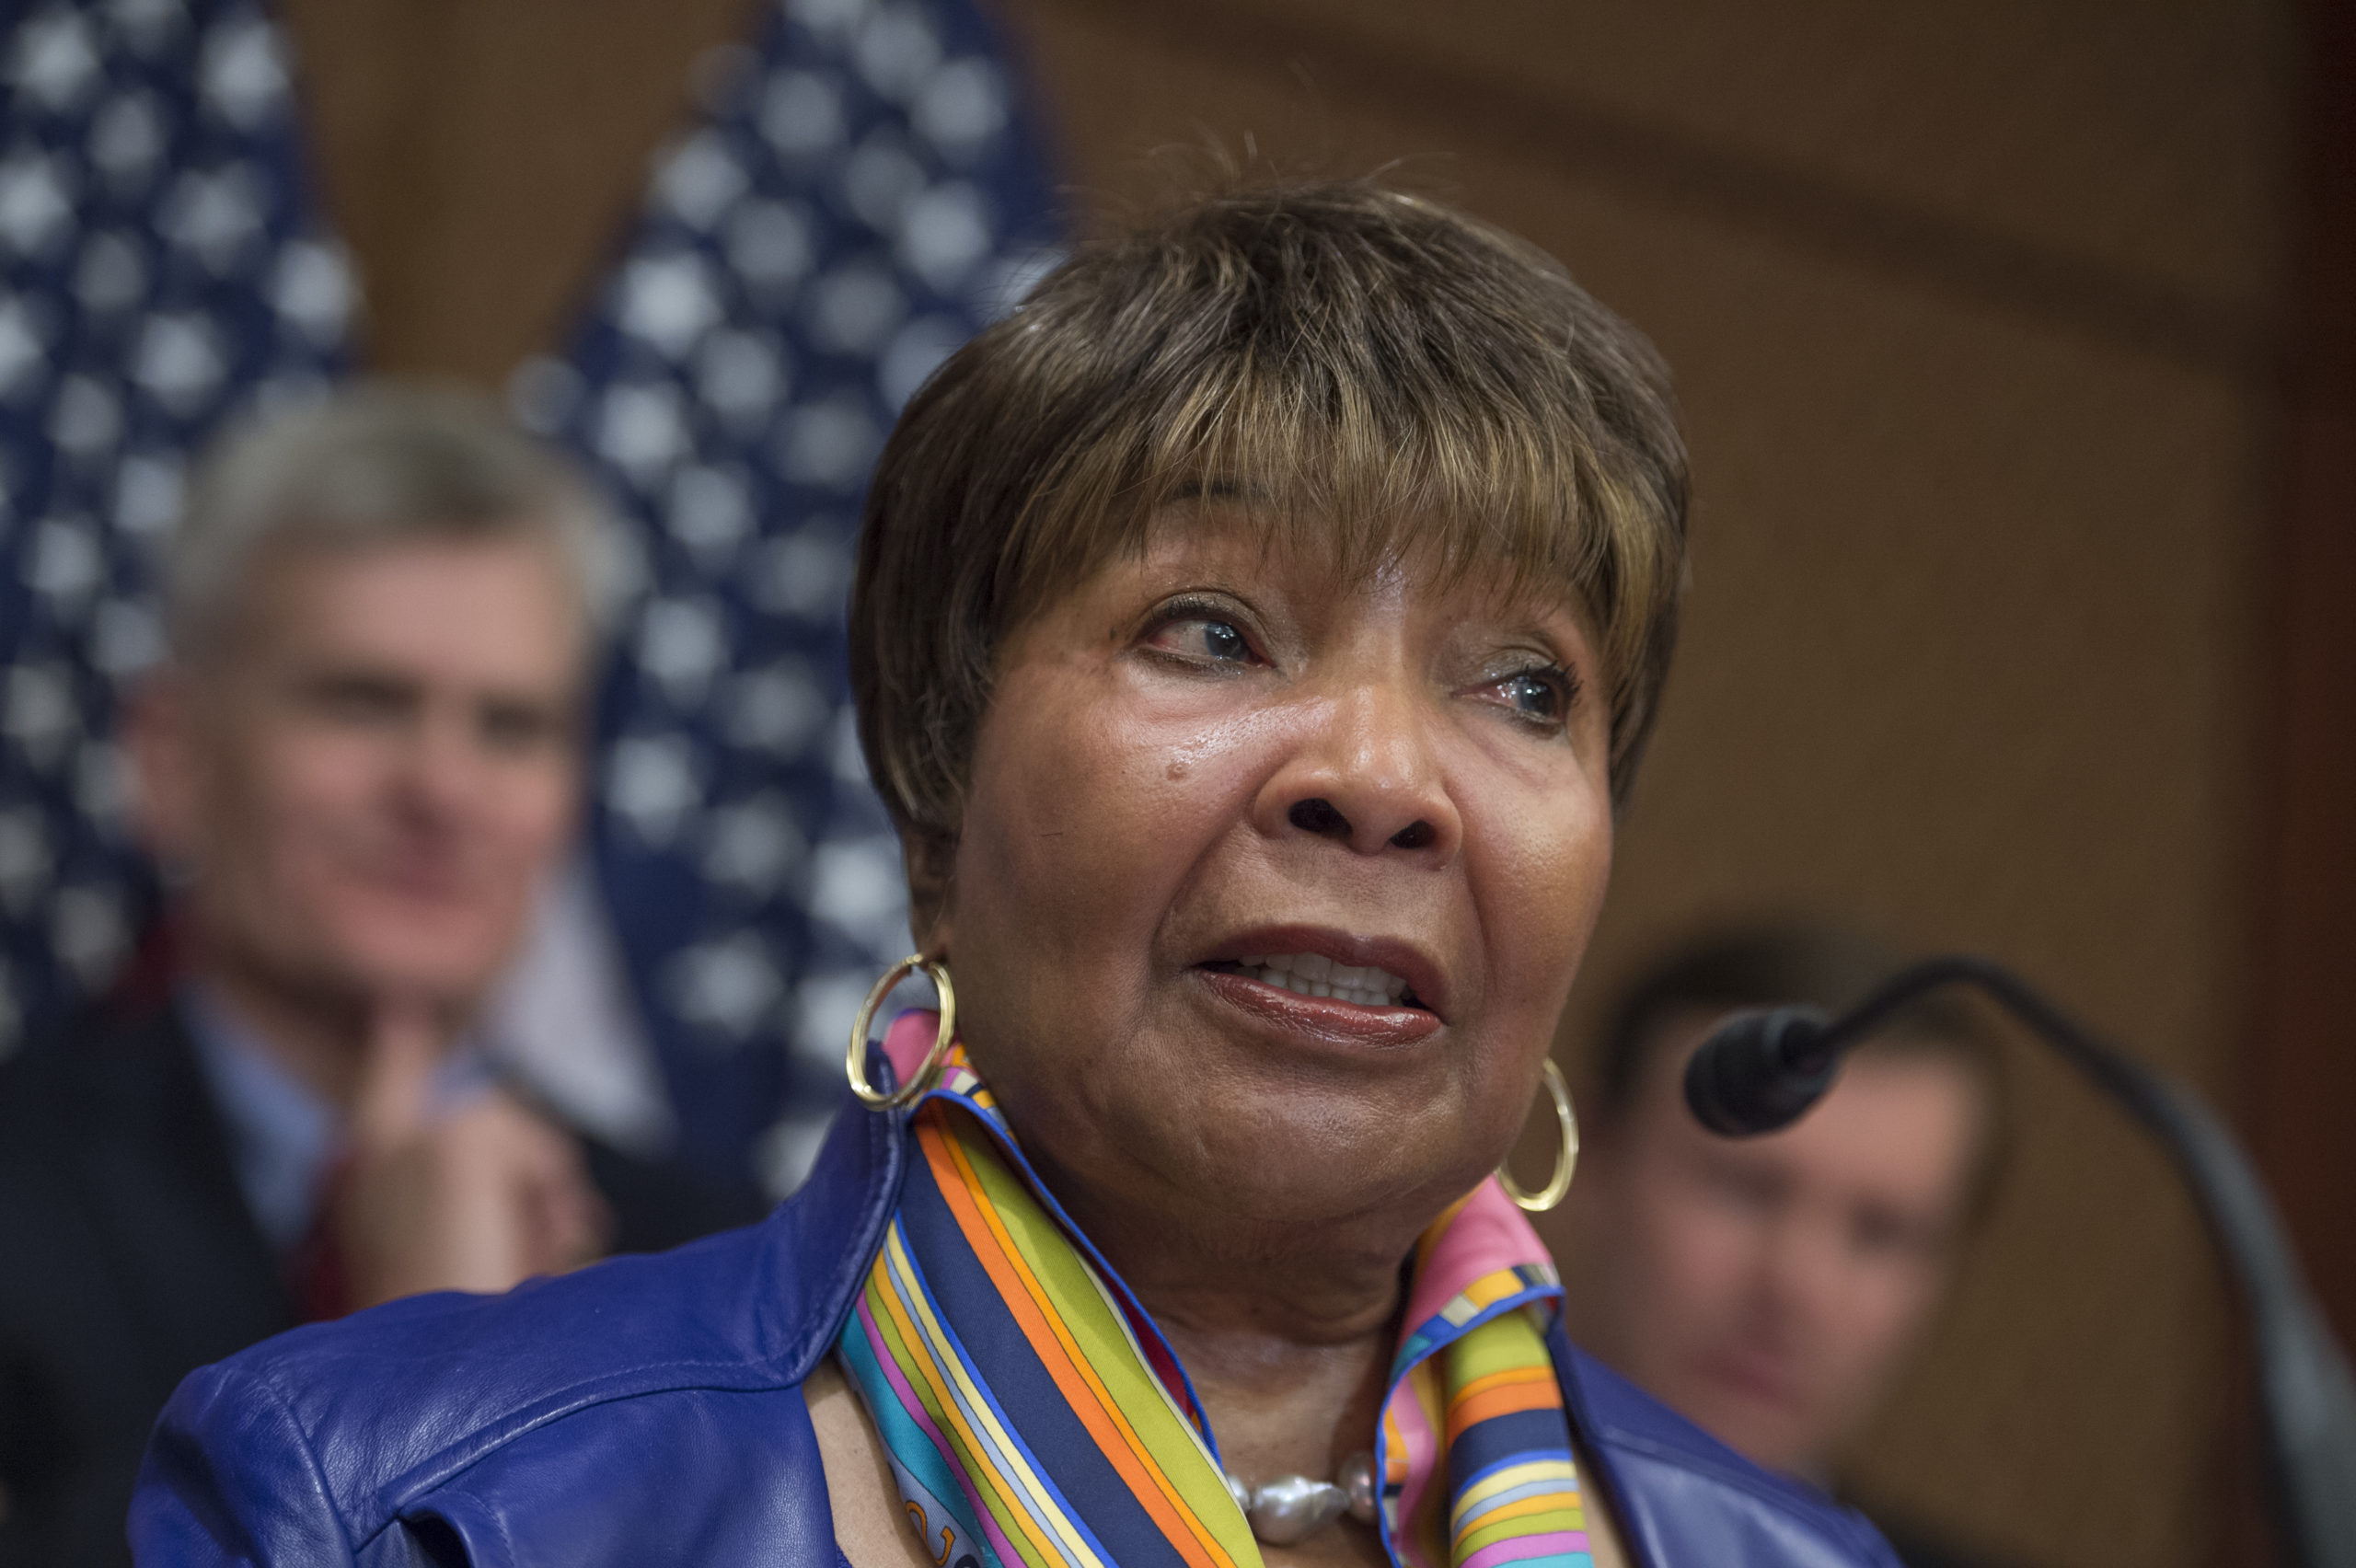 A color photo of Eddie Bernice Johnson, wearing a blue jacket, gold hoop earrings and a rainbow scarf.